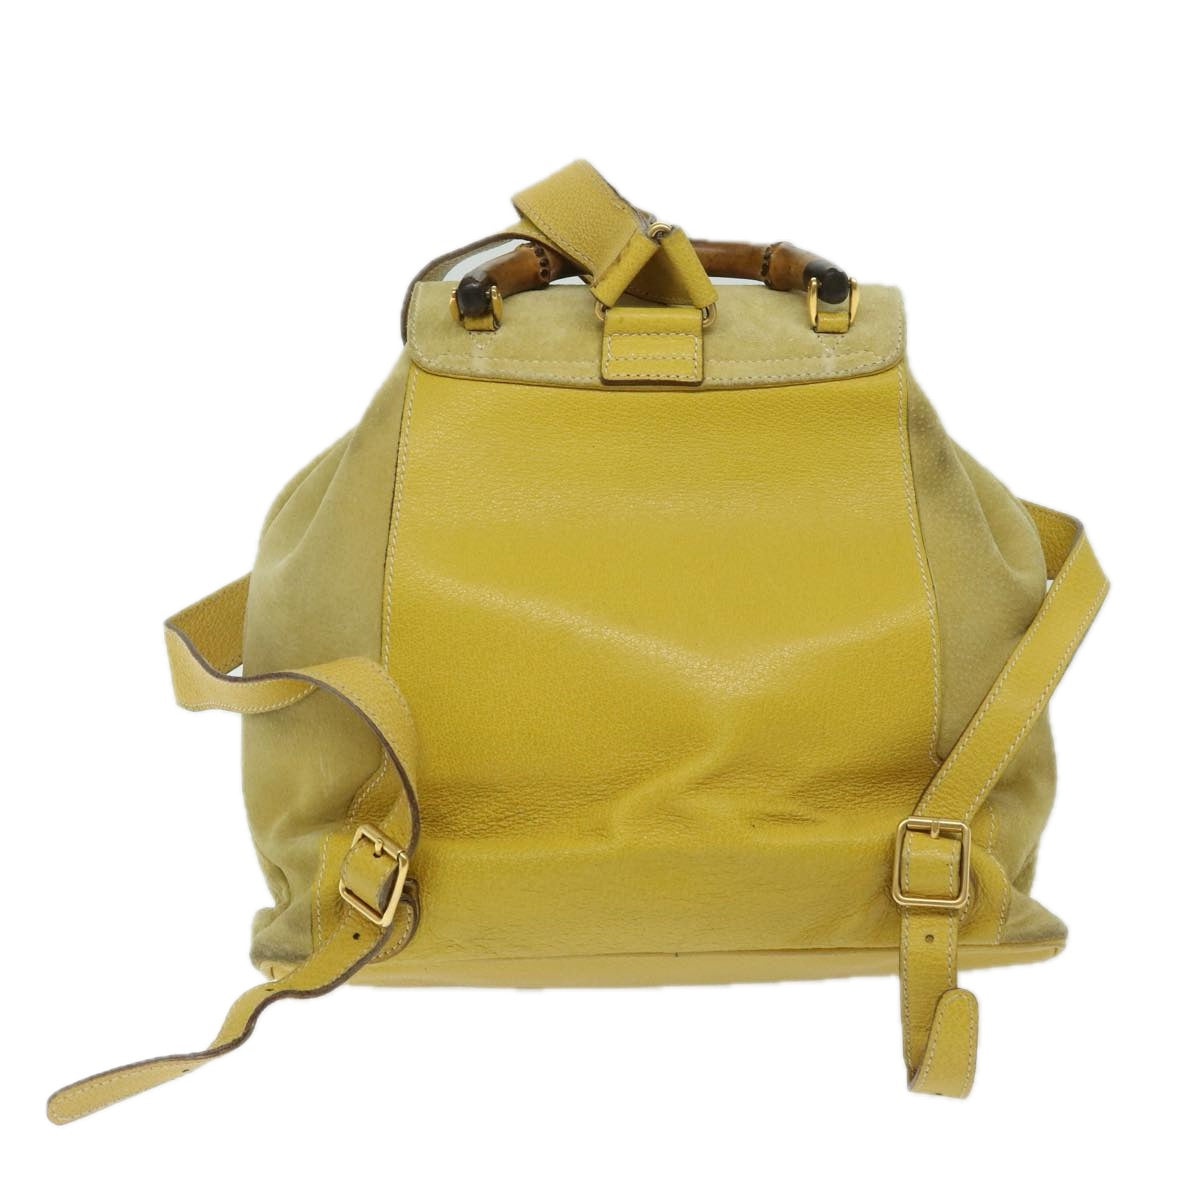 GUCCI Bamboo Backpack Suede Leather Yellow 003 2058 0016 Auth 67684 - 0